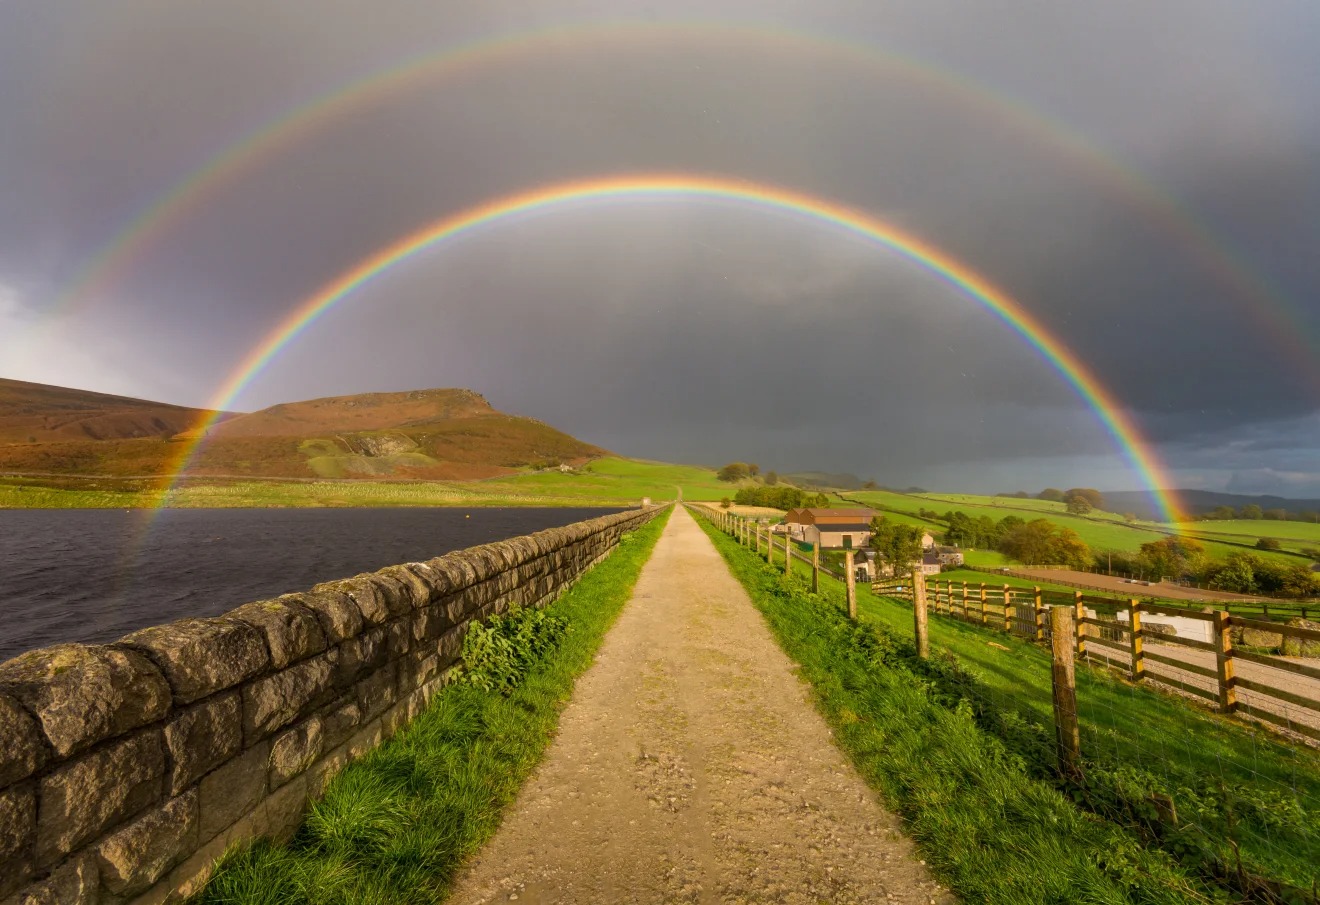 🔭 Are You Intelligent Enough to Pass This Challenging Science Quiz? Let’s Find Out Double rainbow